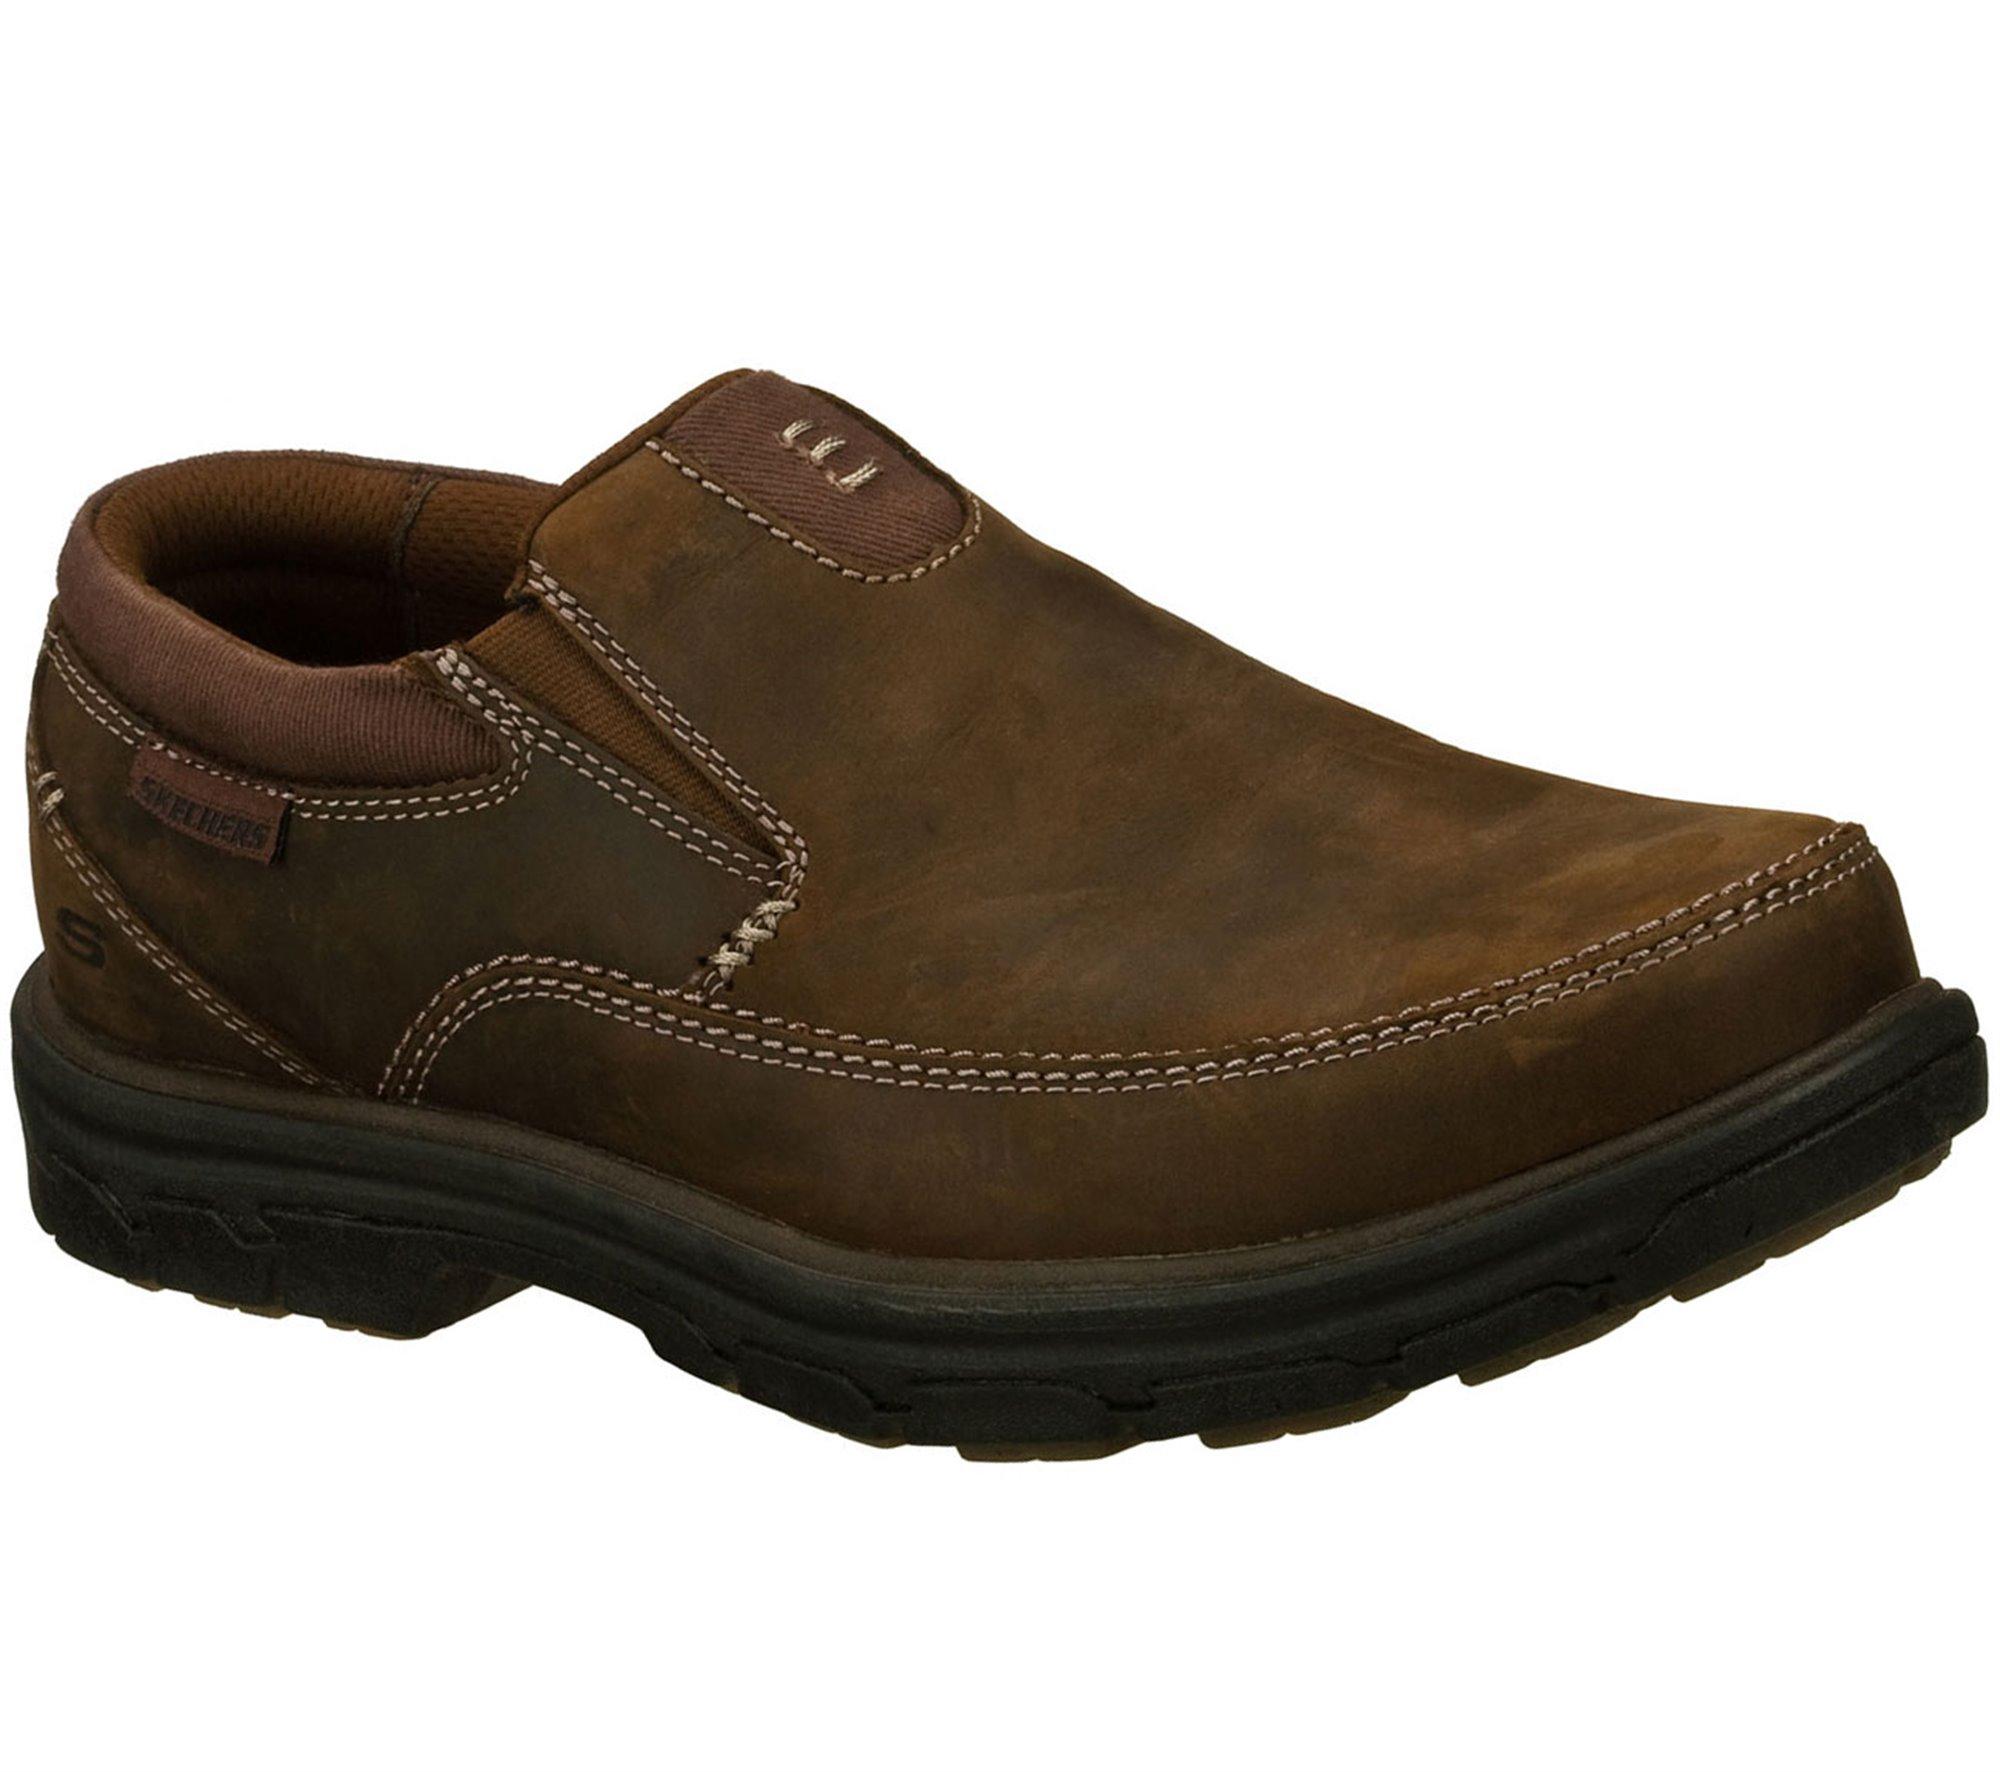 Skechers Leather Relaxed Fit: Segment - The Search - Final Sale in ...